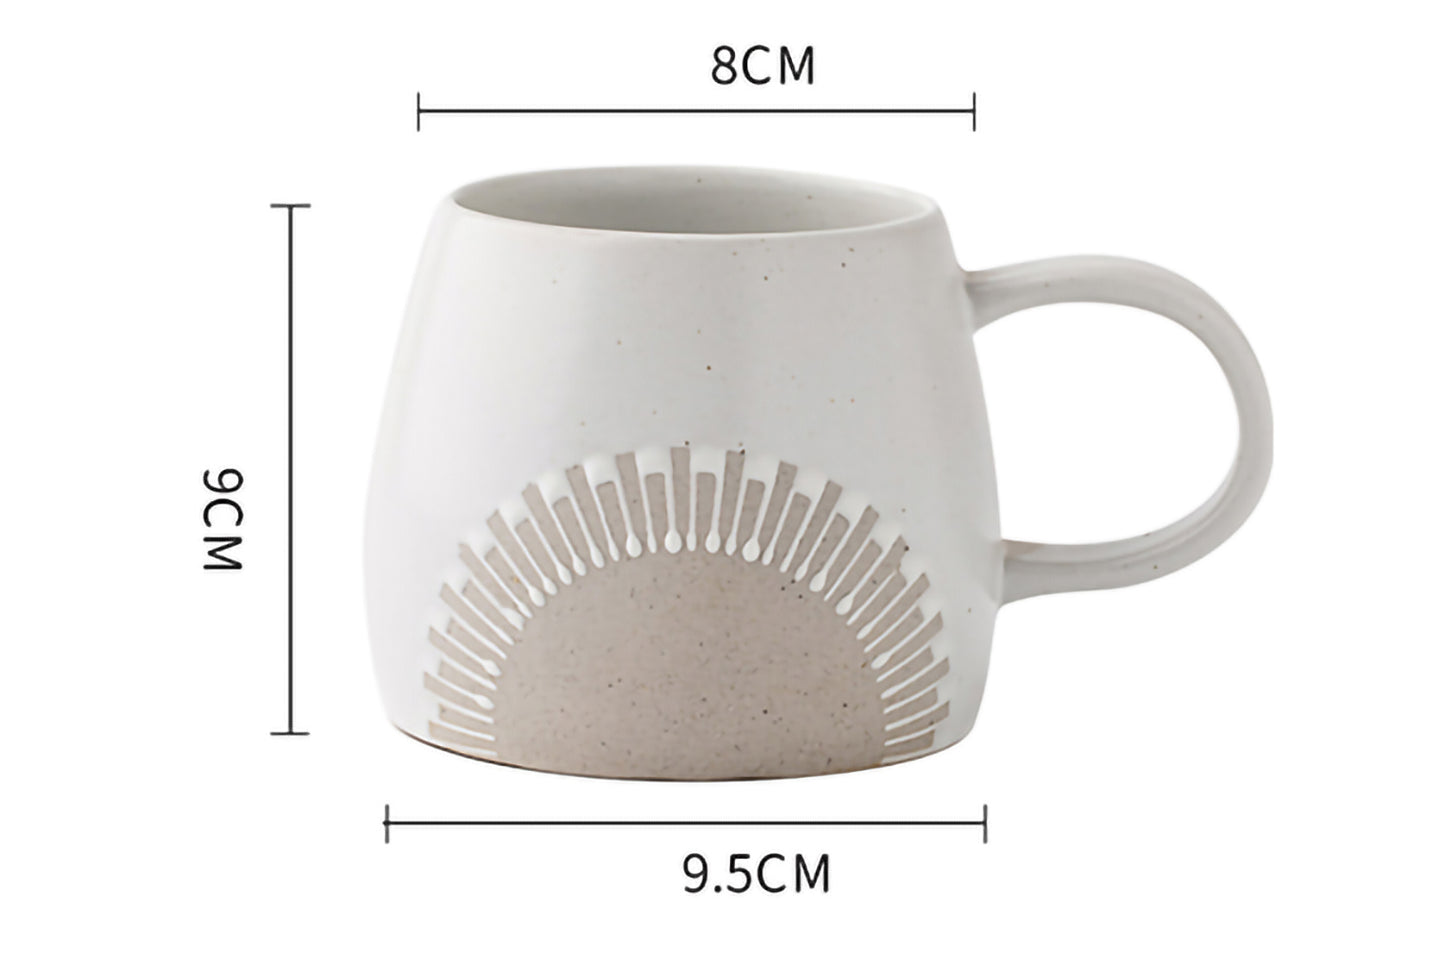 Aesthetic Vintage Coffee Mug Cup │ Ceramic High Temperature Resistance Big Belly Cup │ Kitchenware